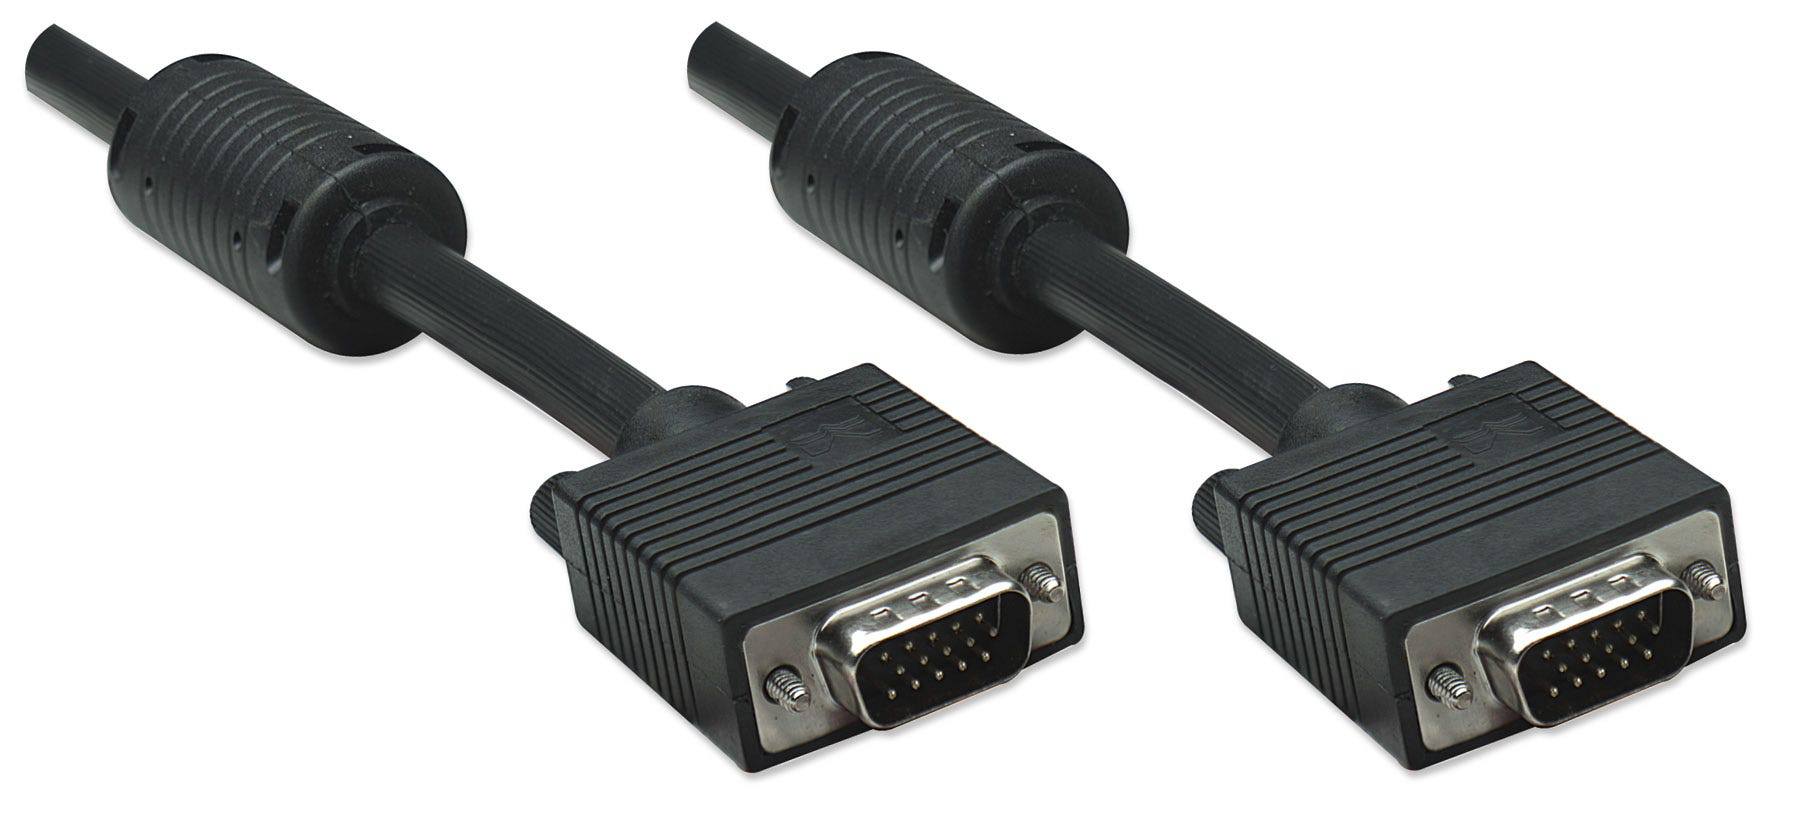 Manhattan VGA Monitor Cable (with Ferrite Cores), 4.5m, Black, Male to Male, HD15, Cable of higher SVGA Specification (fully compatible)